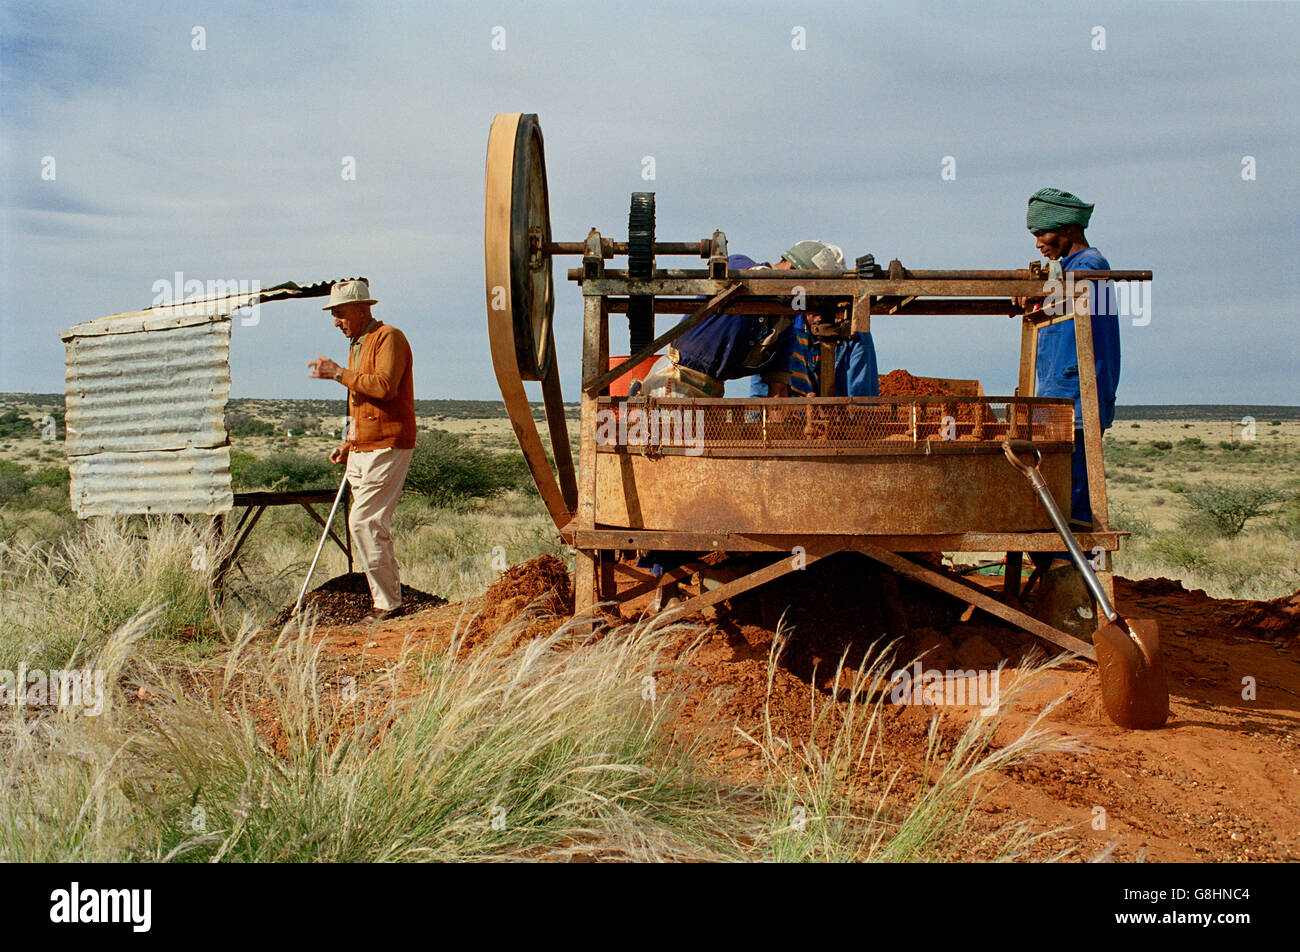 Small diamond mine diggers and Oom Connie, Windsorton, Northern Cape, South Africa. Stock Photo